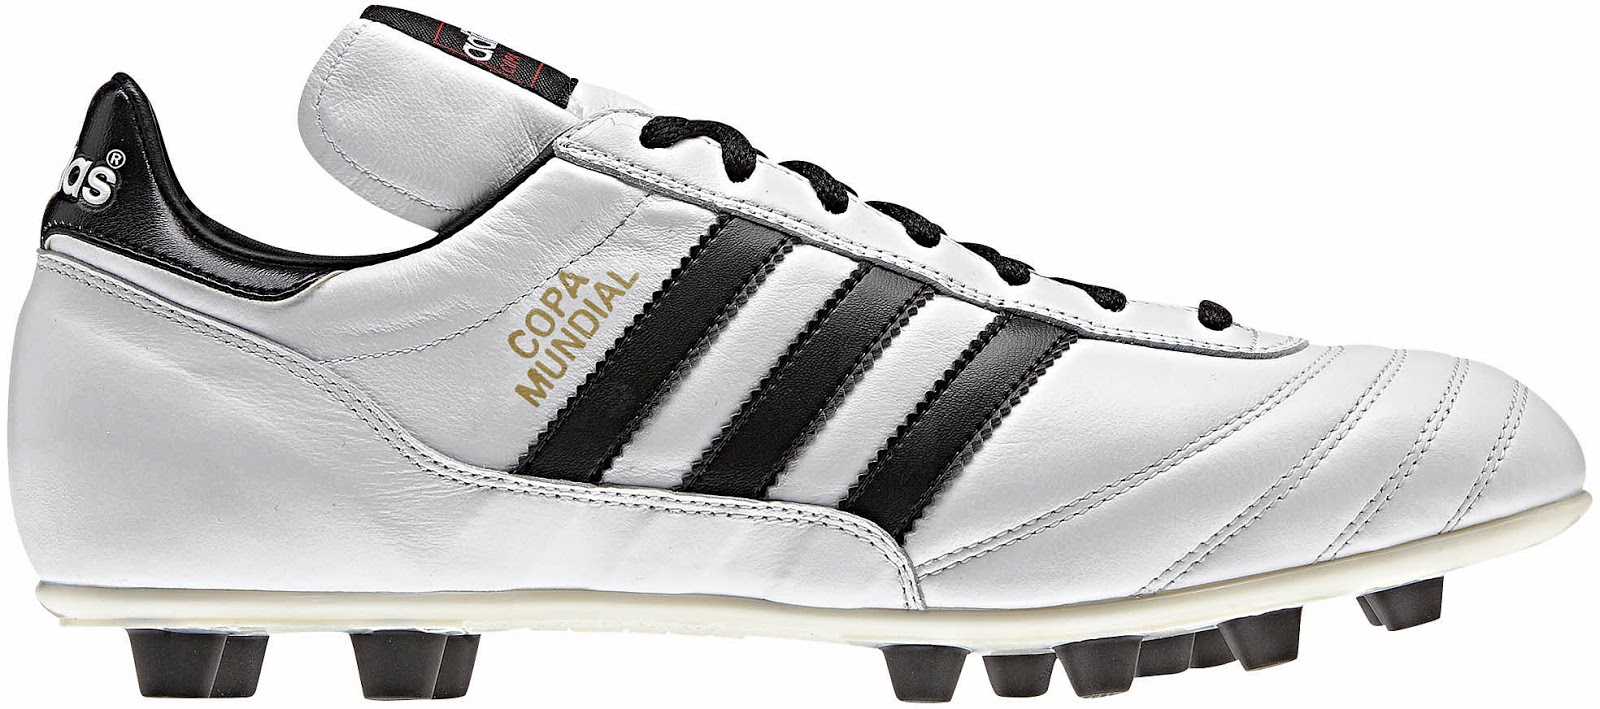 White Adidas Copa Mundial Boot Released - Footy